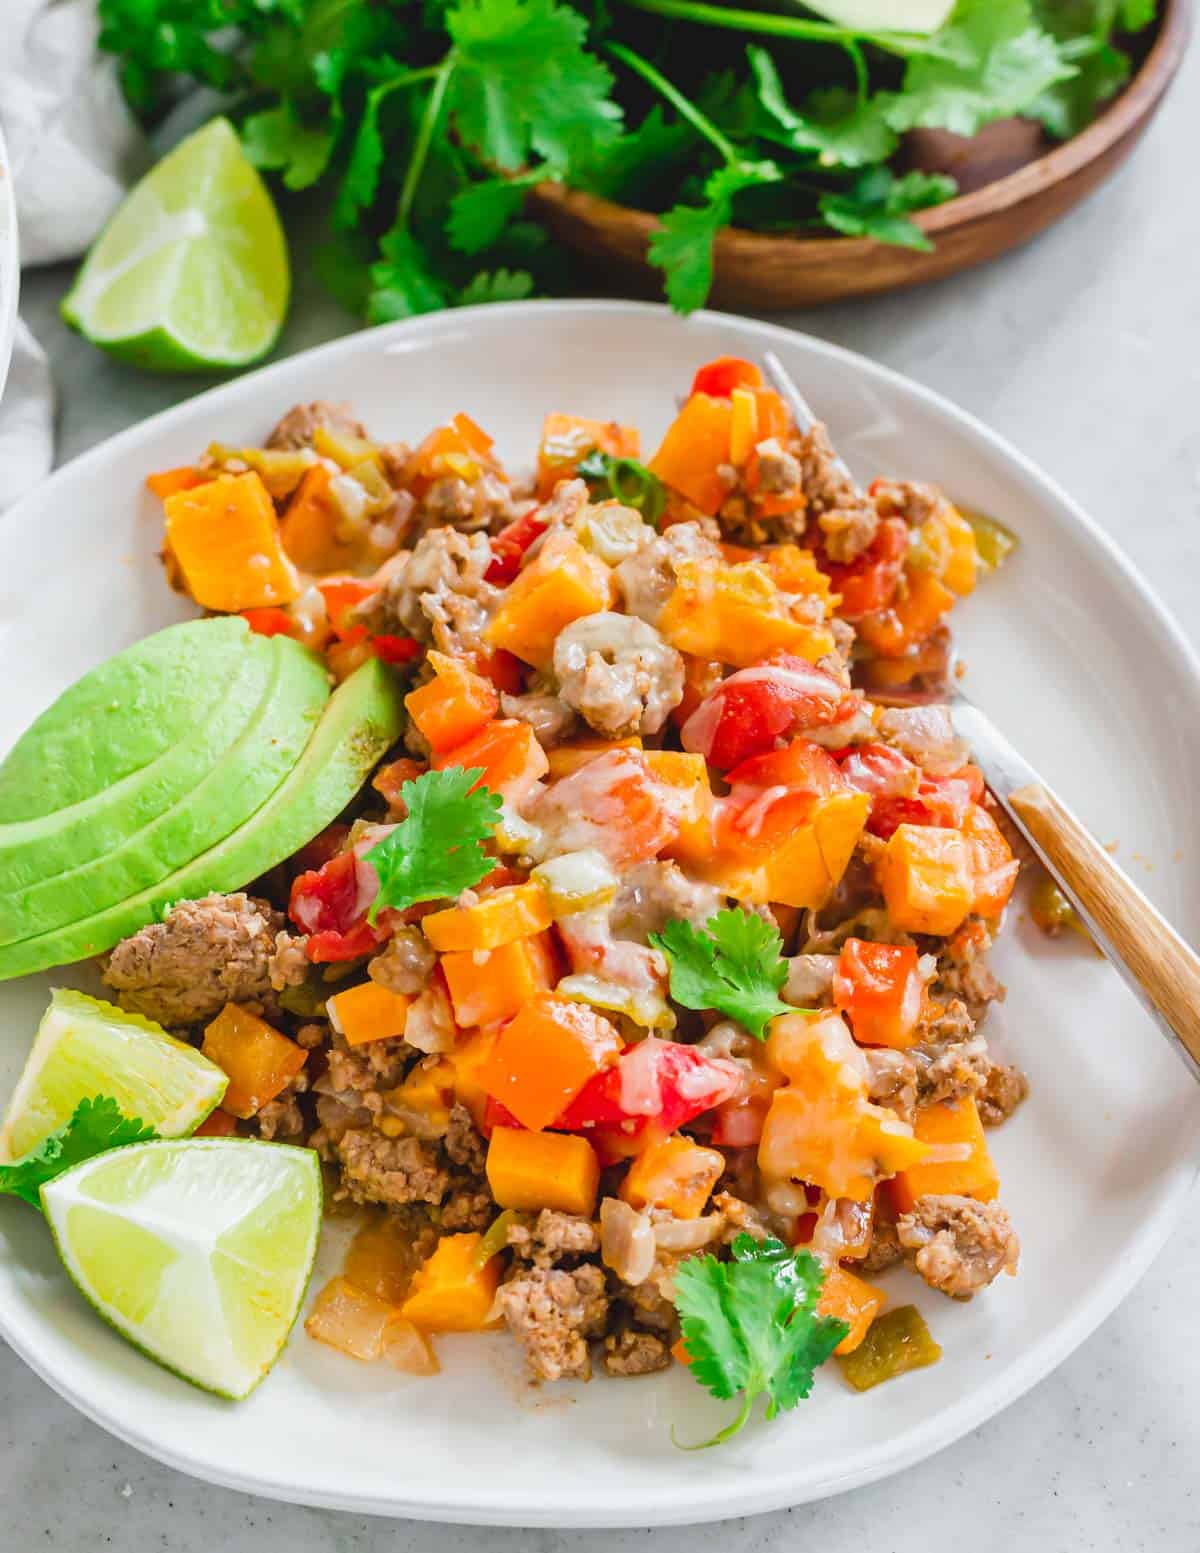 Easy recipe for ground beef with sweet potatoes served on a plate with lime quarters and sliced avocado.